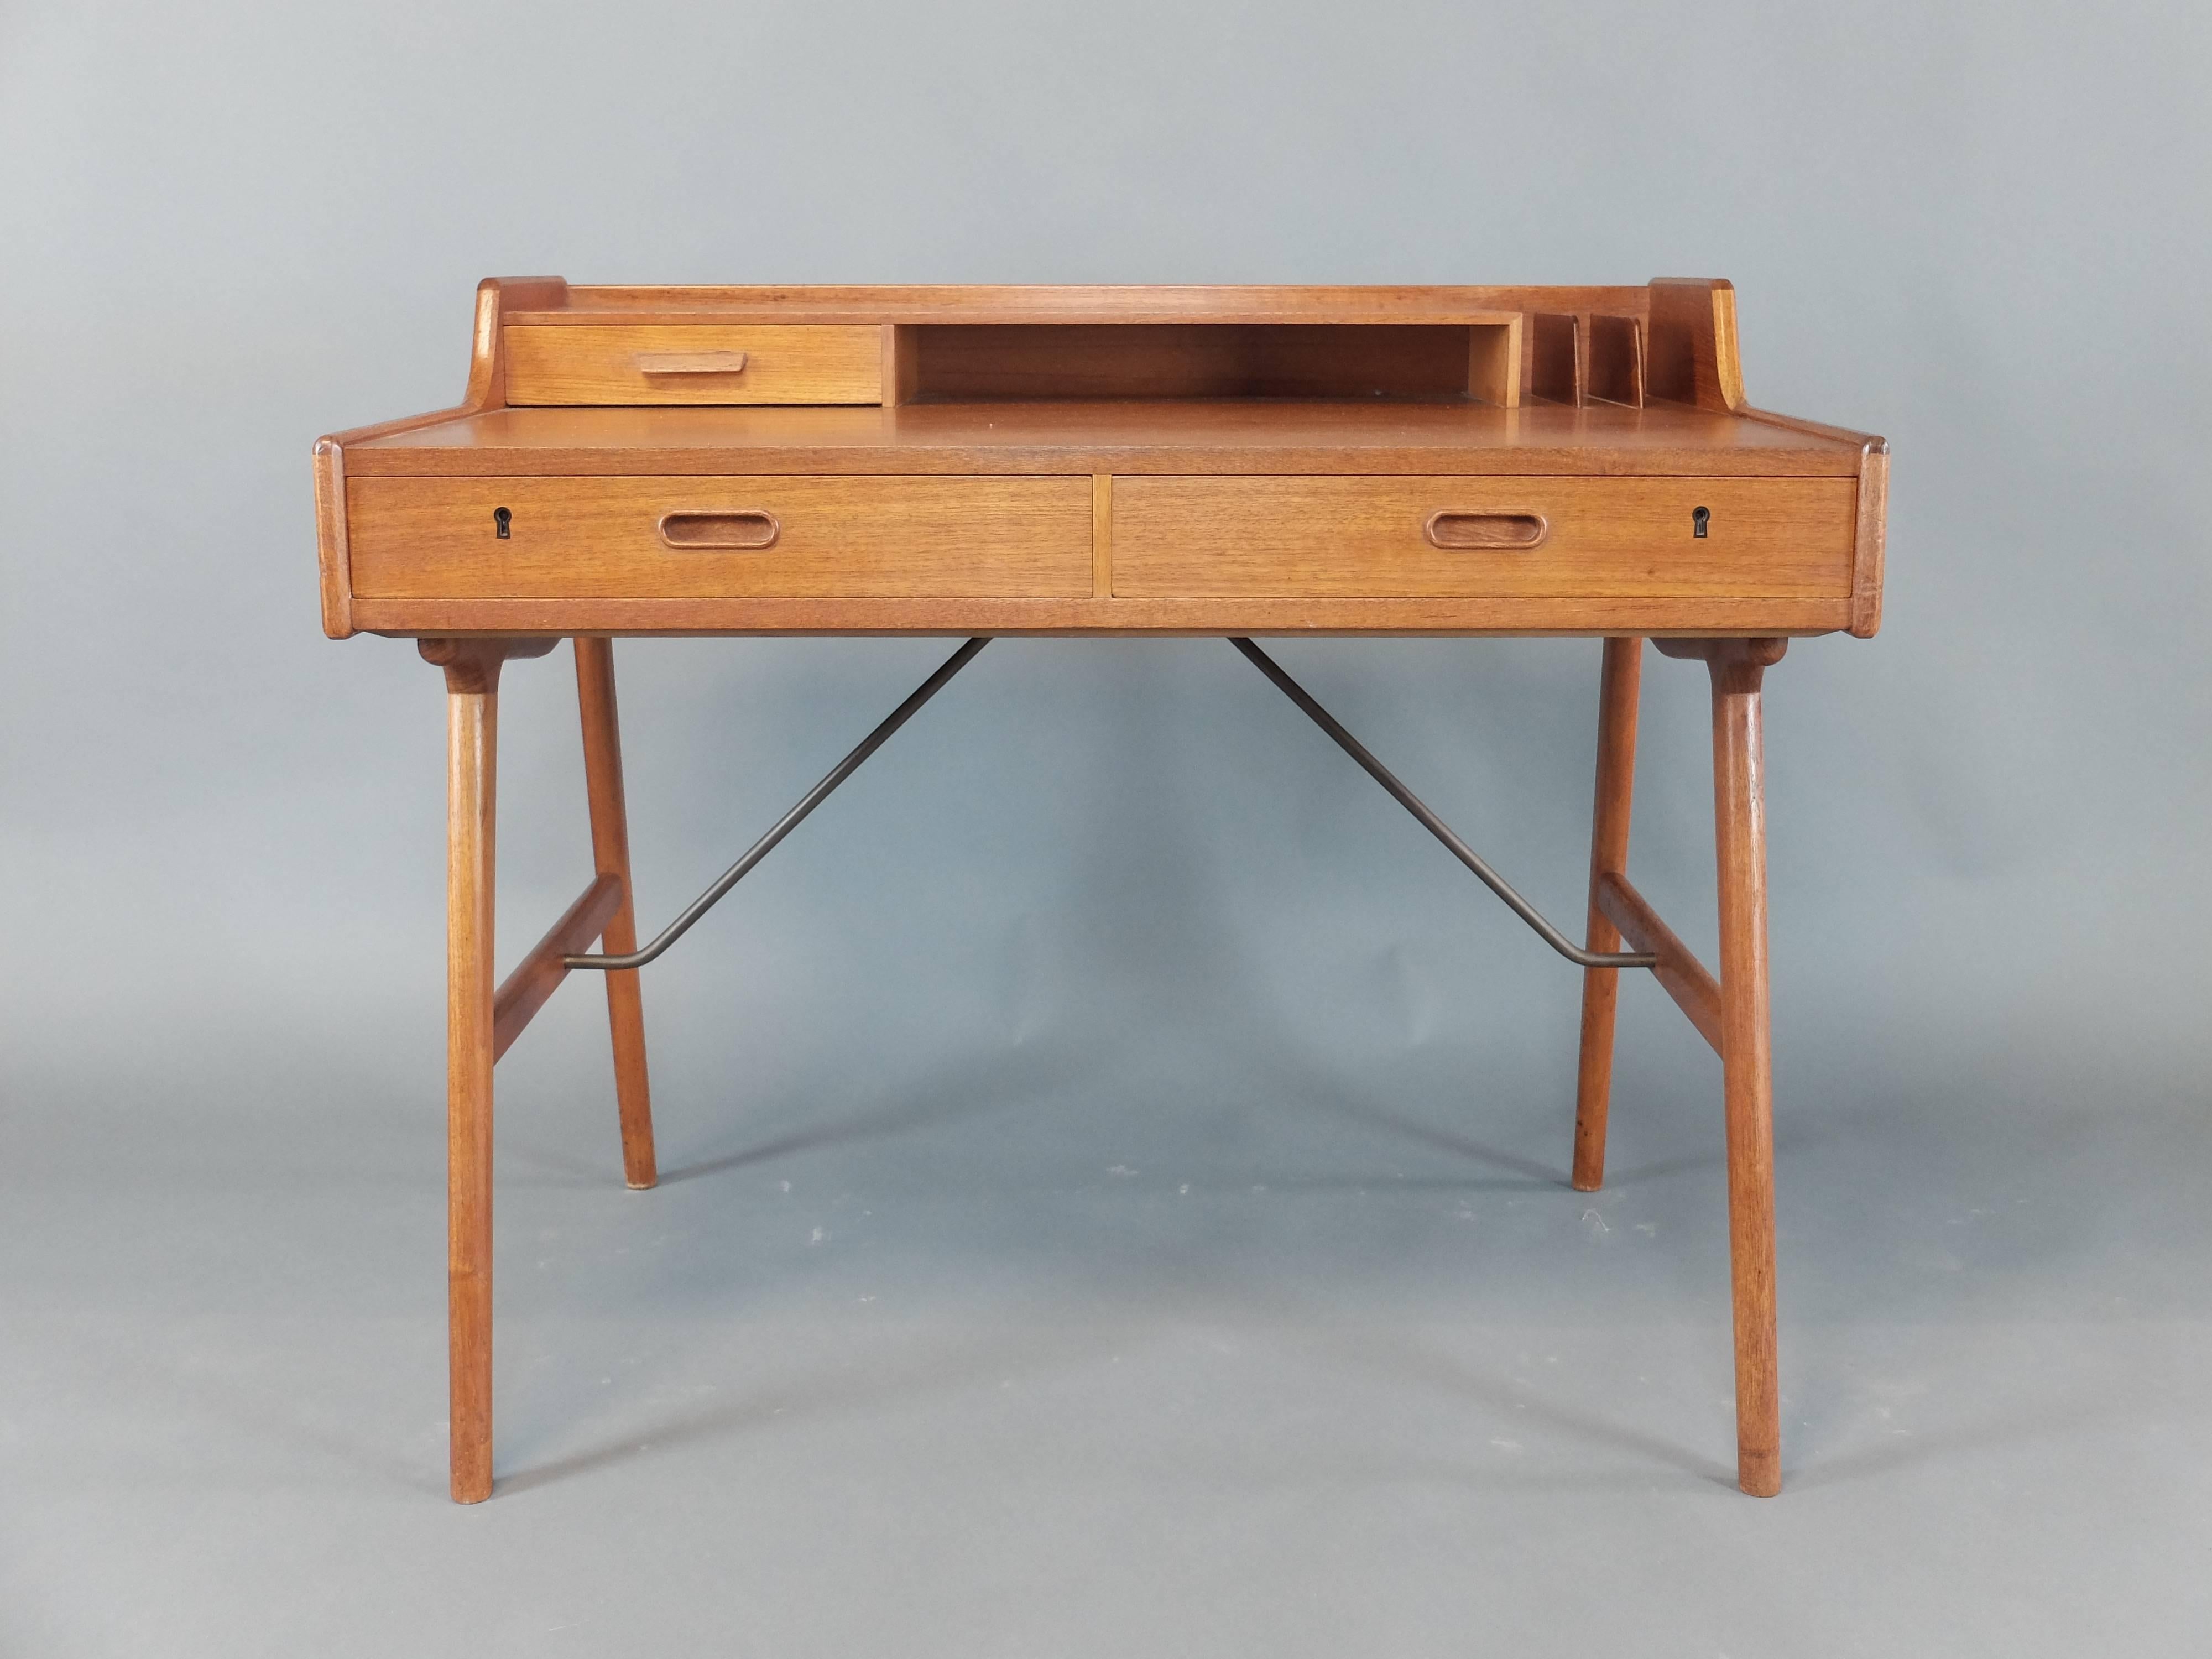 A stunning Mid-Century Modern teak desk, model no 65 by Arne Wahl Iversen
Original locks, replacement key
Stamped 'Made in Denmark' '56'
Very good condition, no defects but some very minor age related wear.